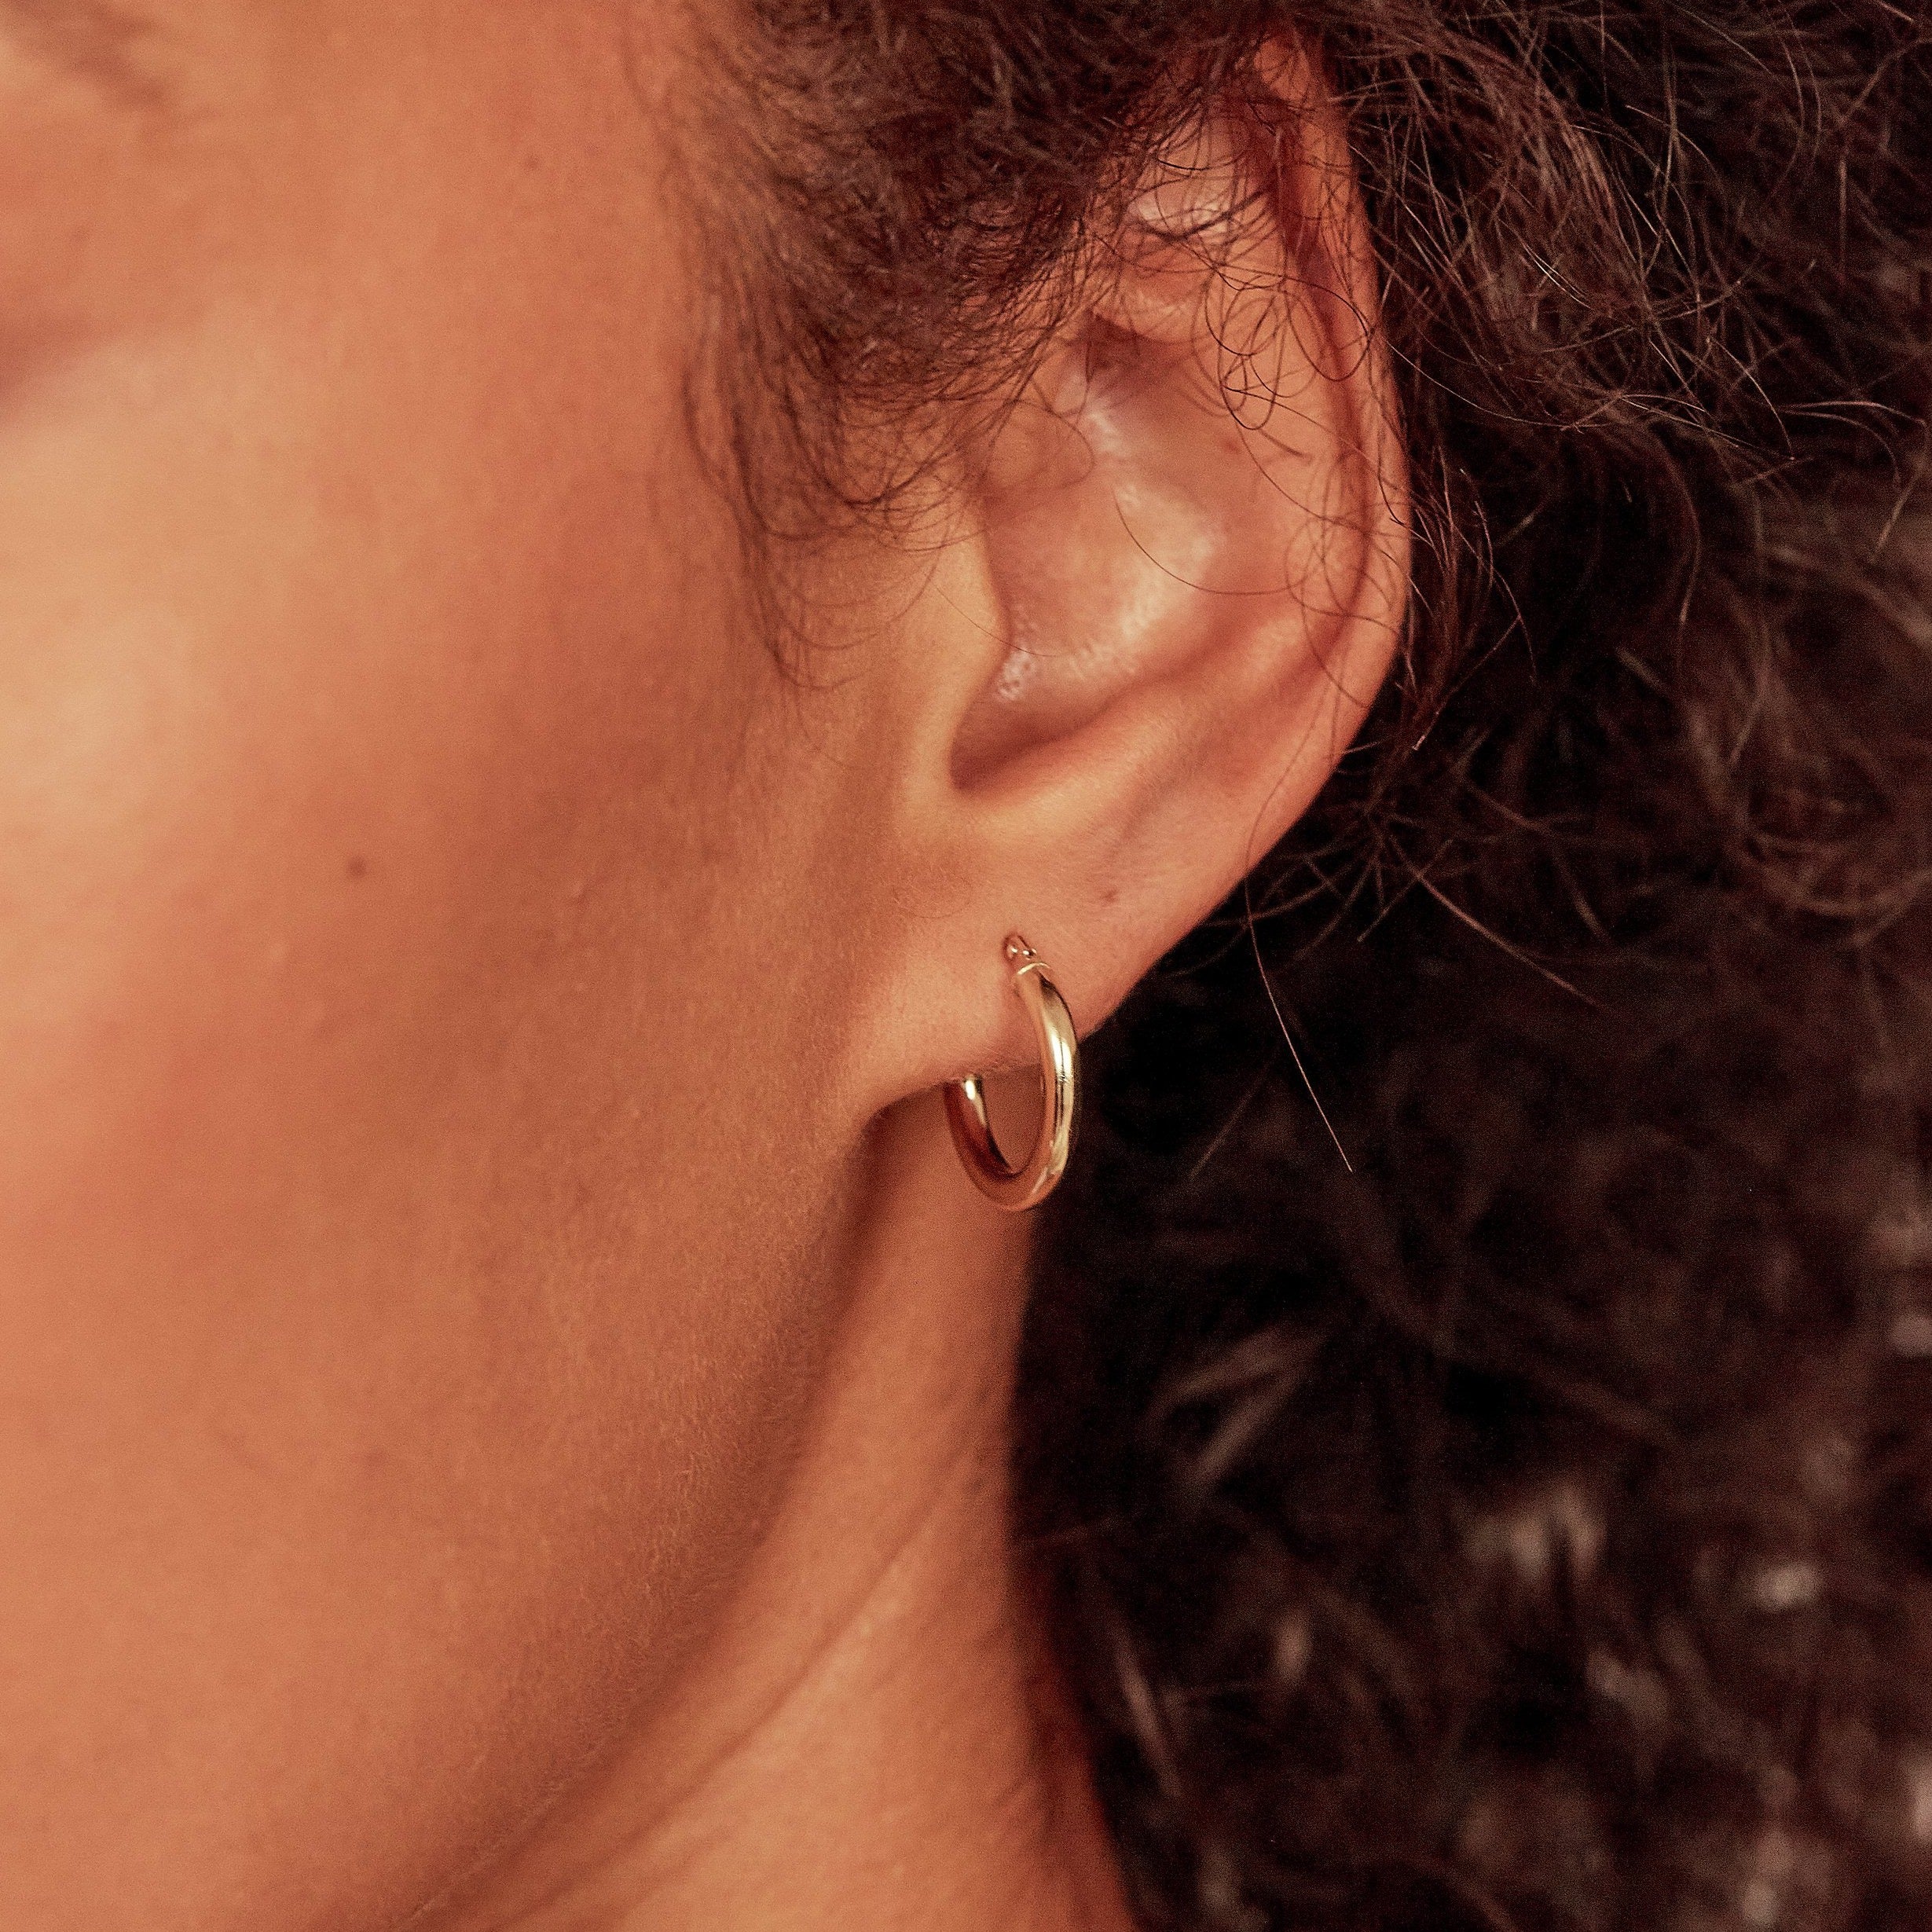 Gold small rounded hoop earring in one ear lobe